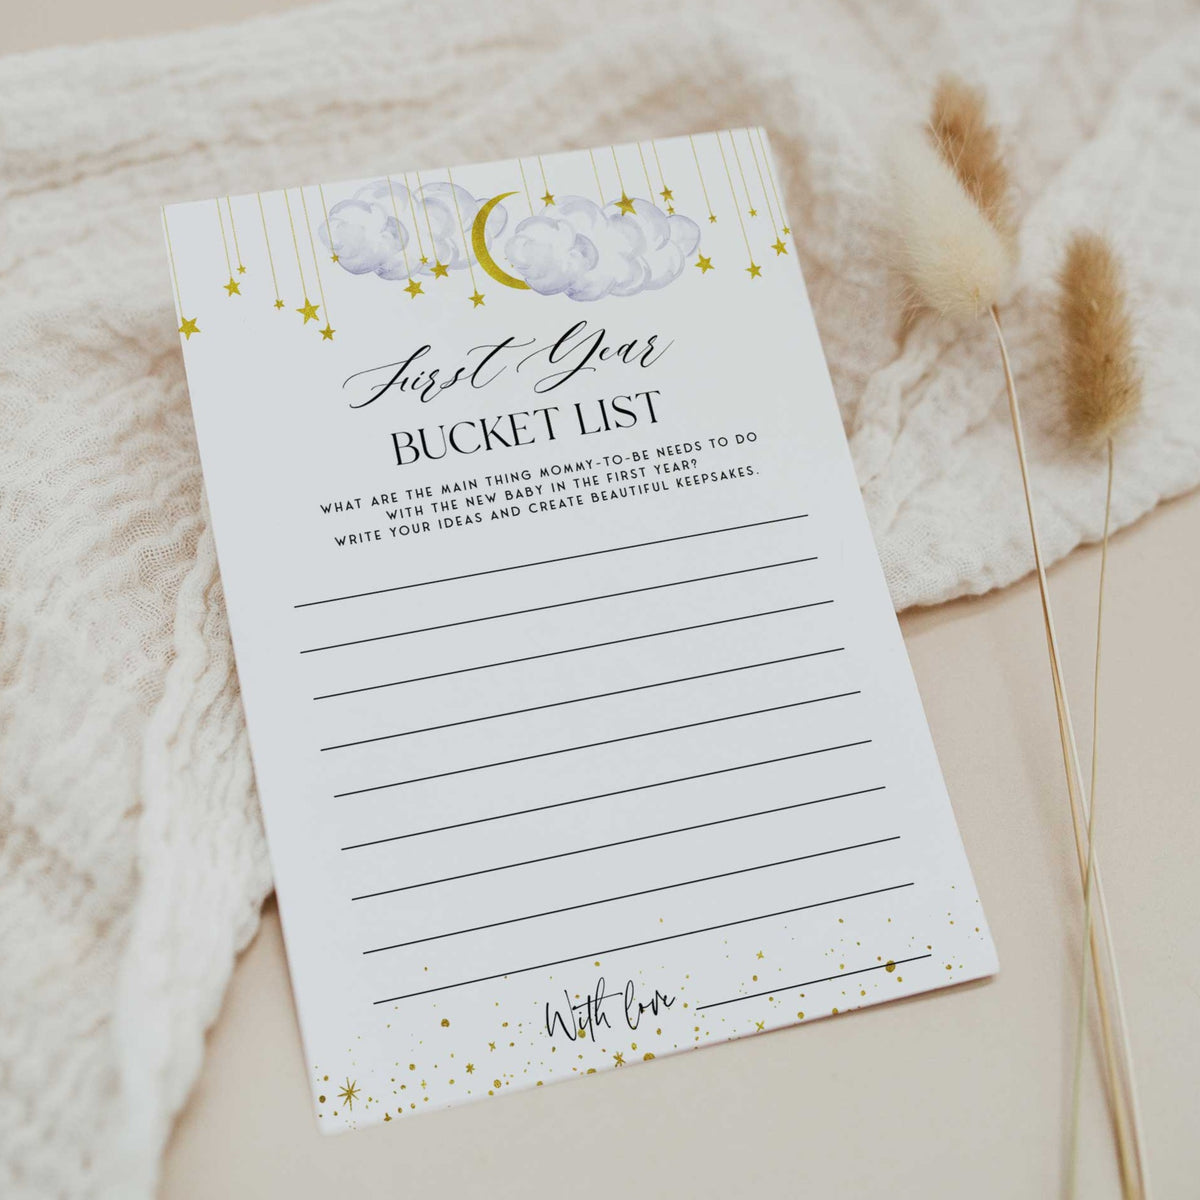 Fully editable and printable baby shower first year bucket list game with a little star design. Perfect for a Twinkle Little Star baby shower themed party